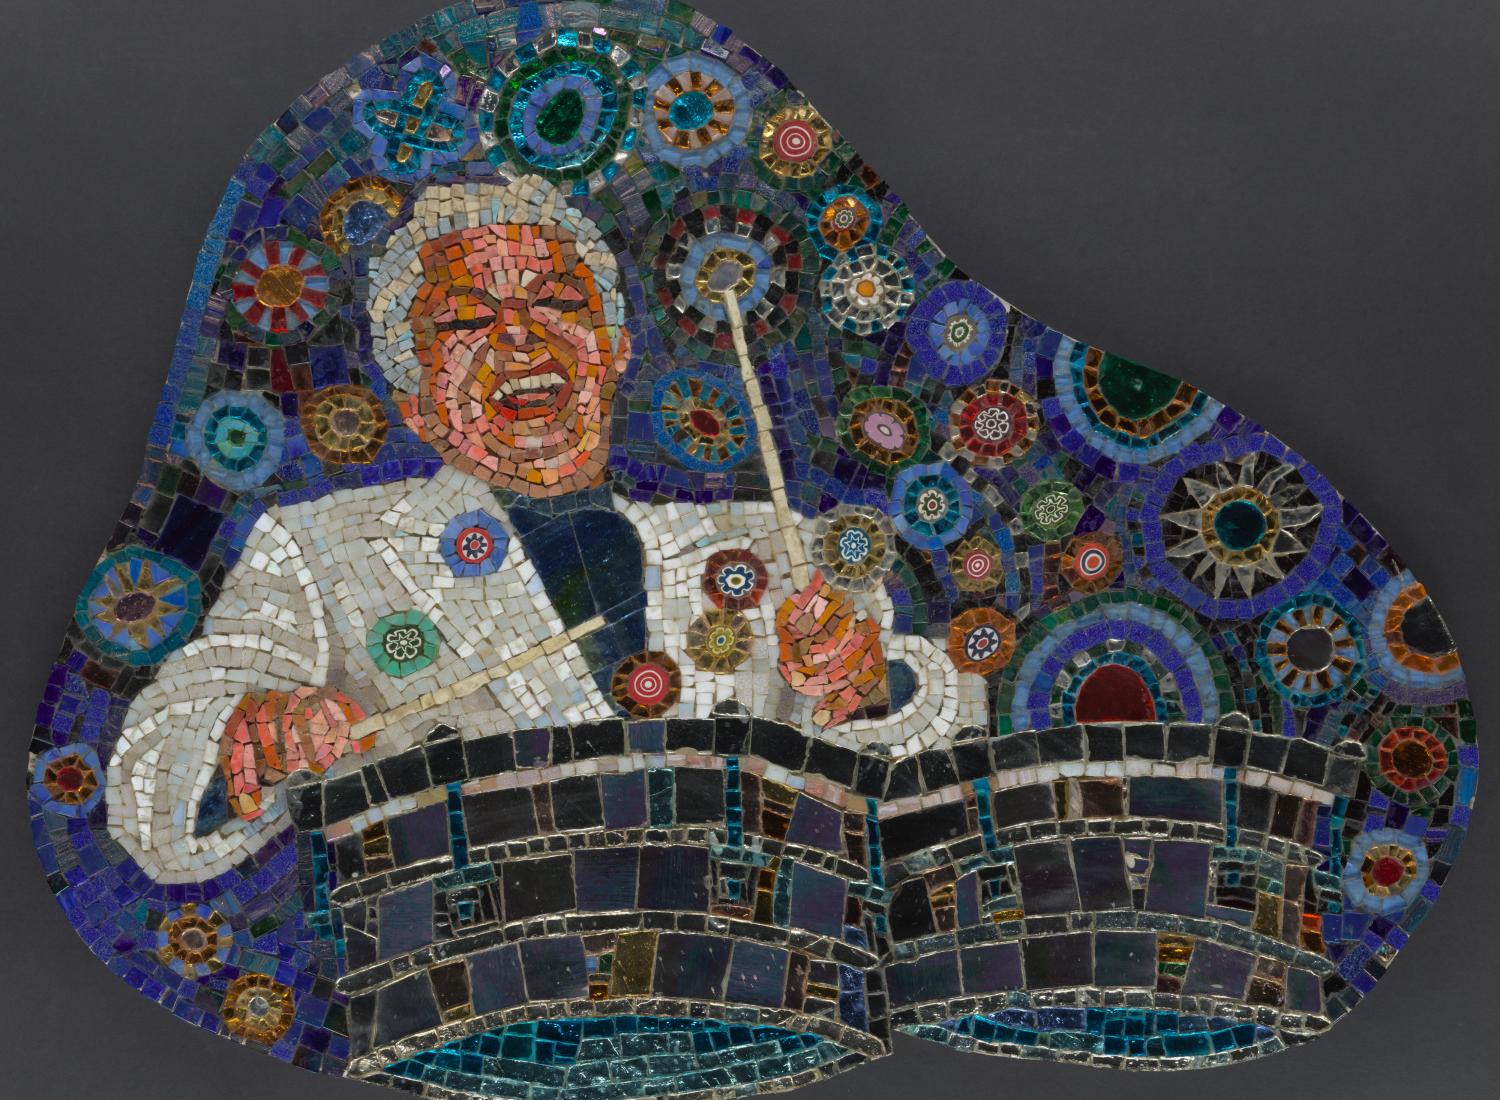 An image of a mosaic featured famed musician Tito Puente with an exuberant smile joyfully playing drums with a blue background filled with multicolored circles.